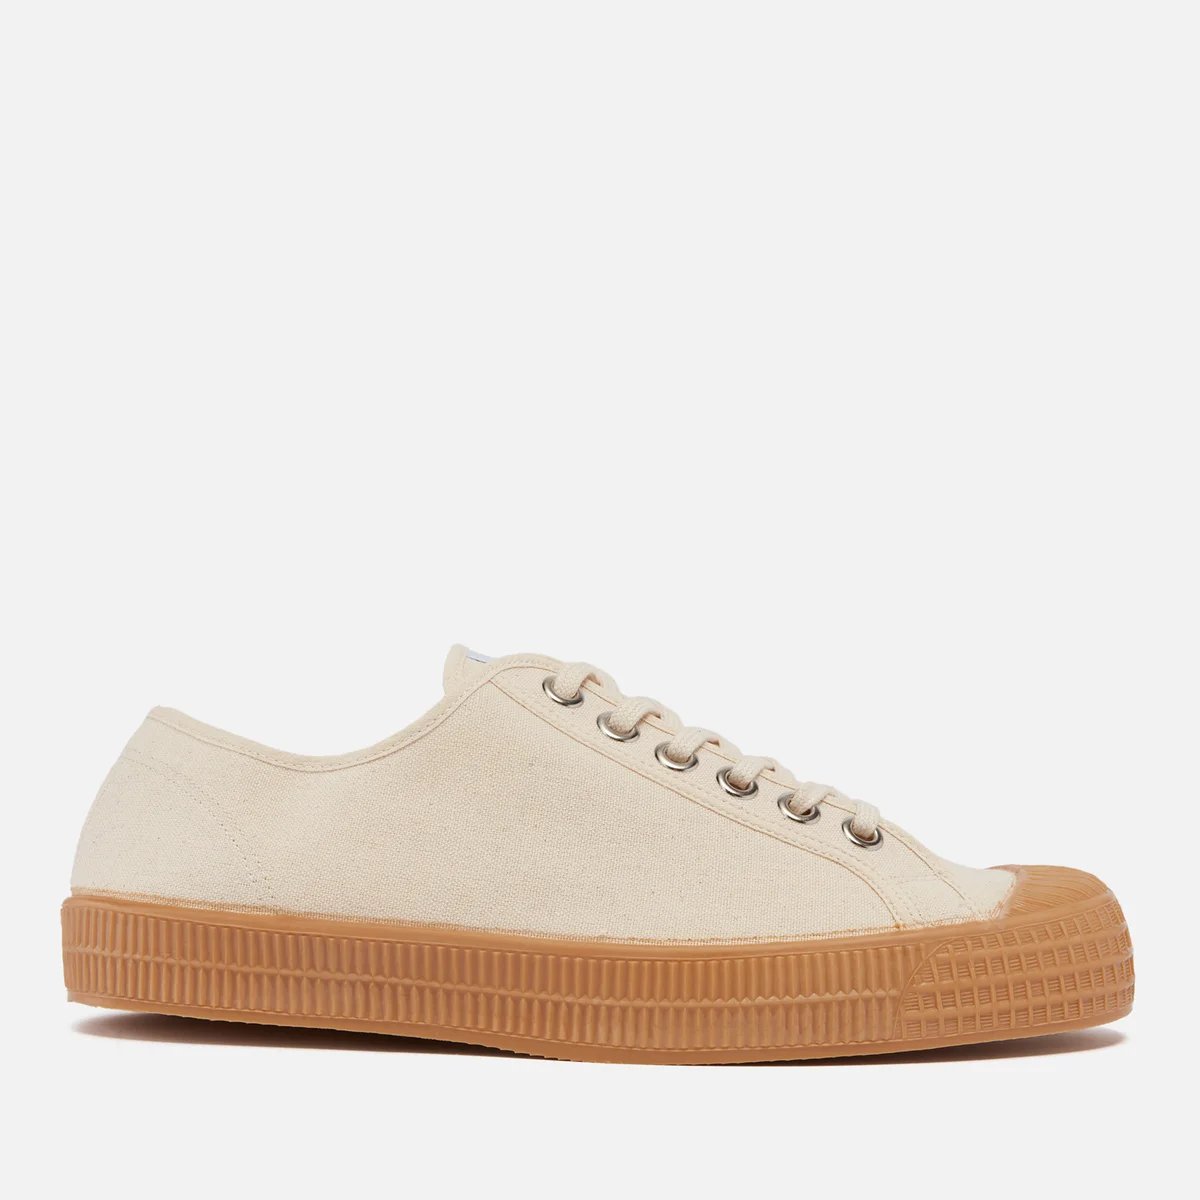 Novesta Star Master Classic Canvas Trainers Image 1